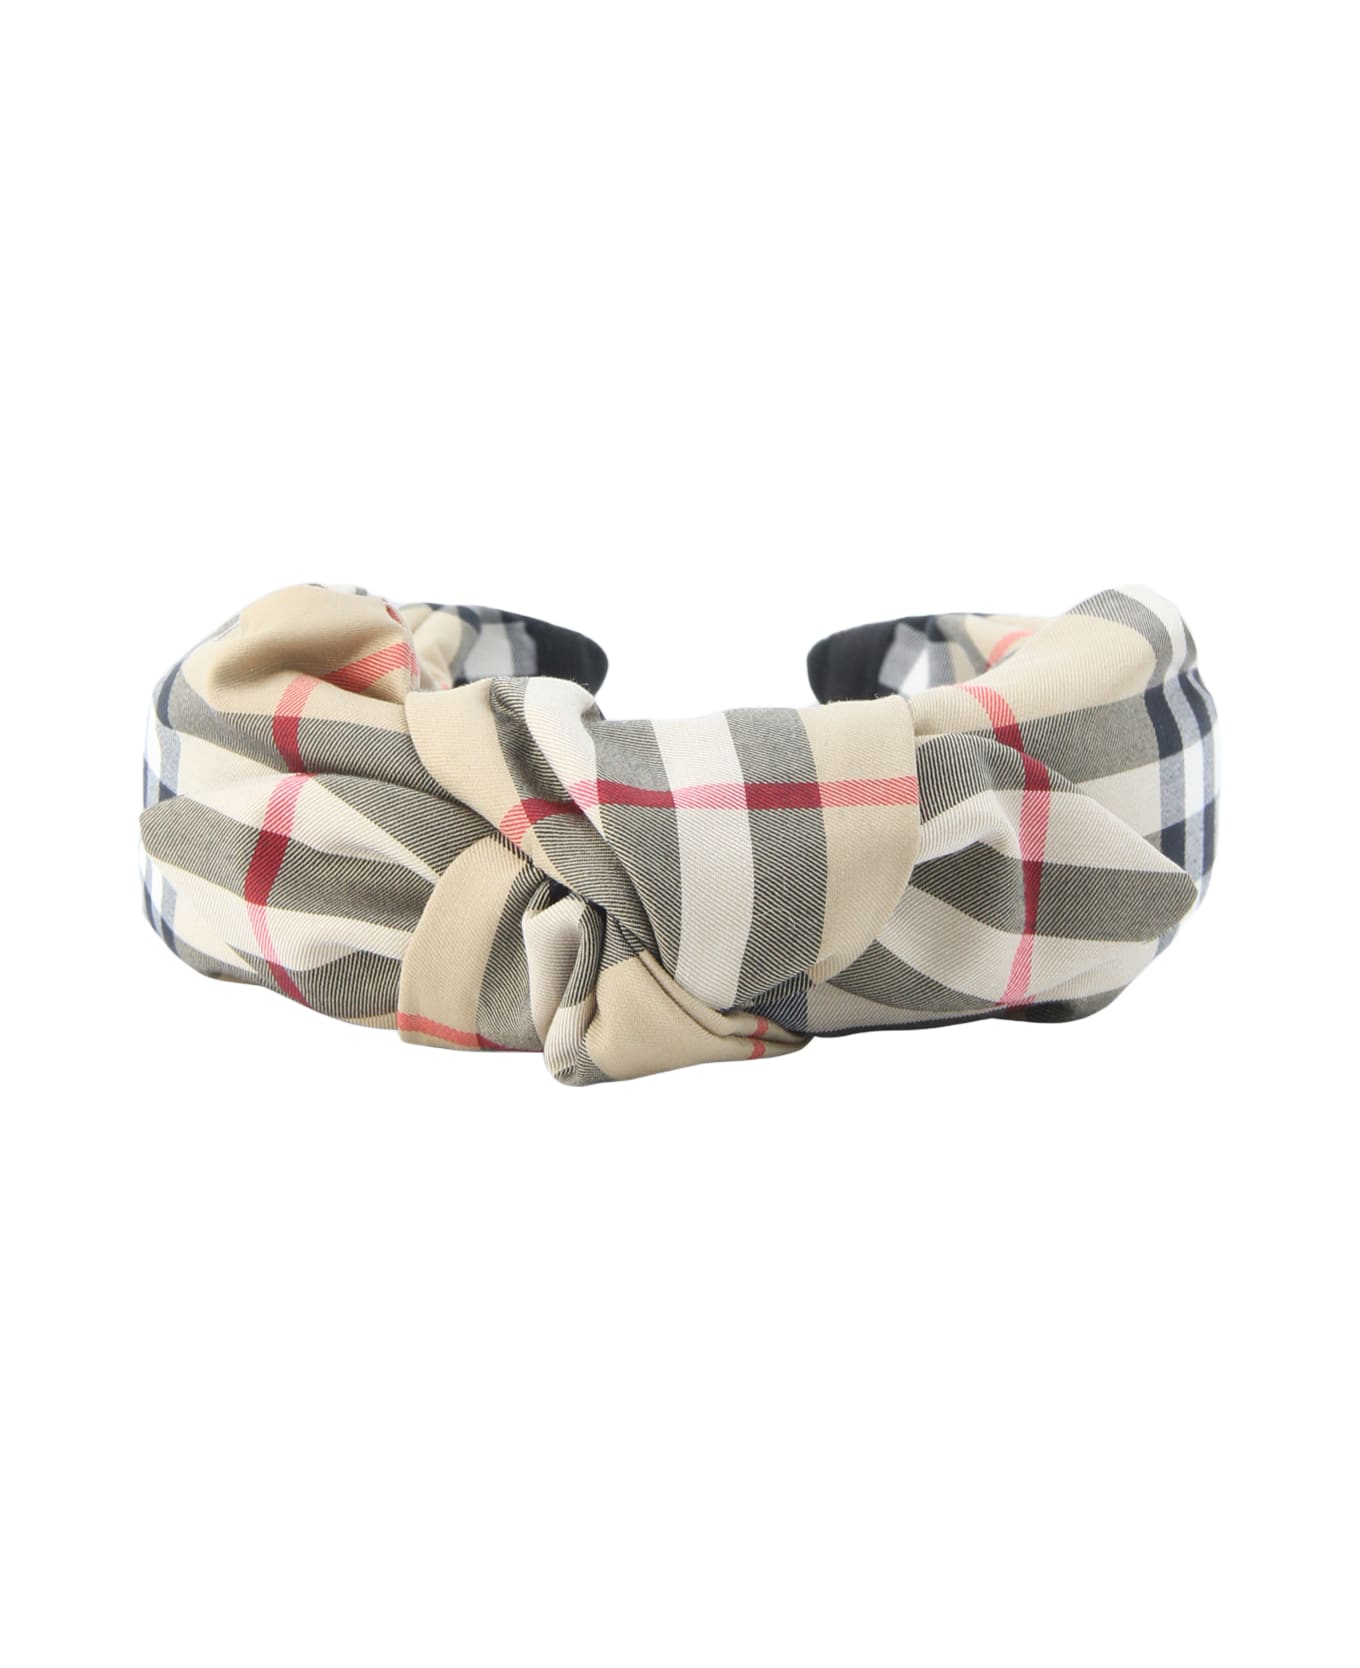 Burberry Archive Beige Check Hairband - ARCHIVE BEIGE CHK アクセサリー＆ギフト